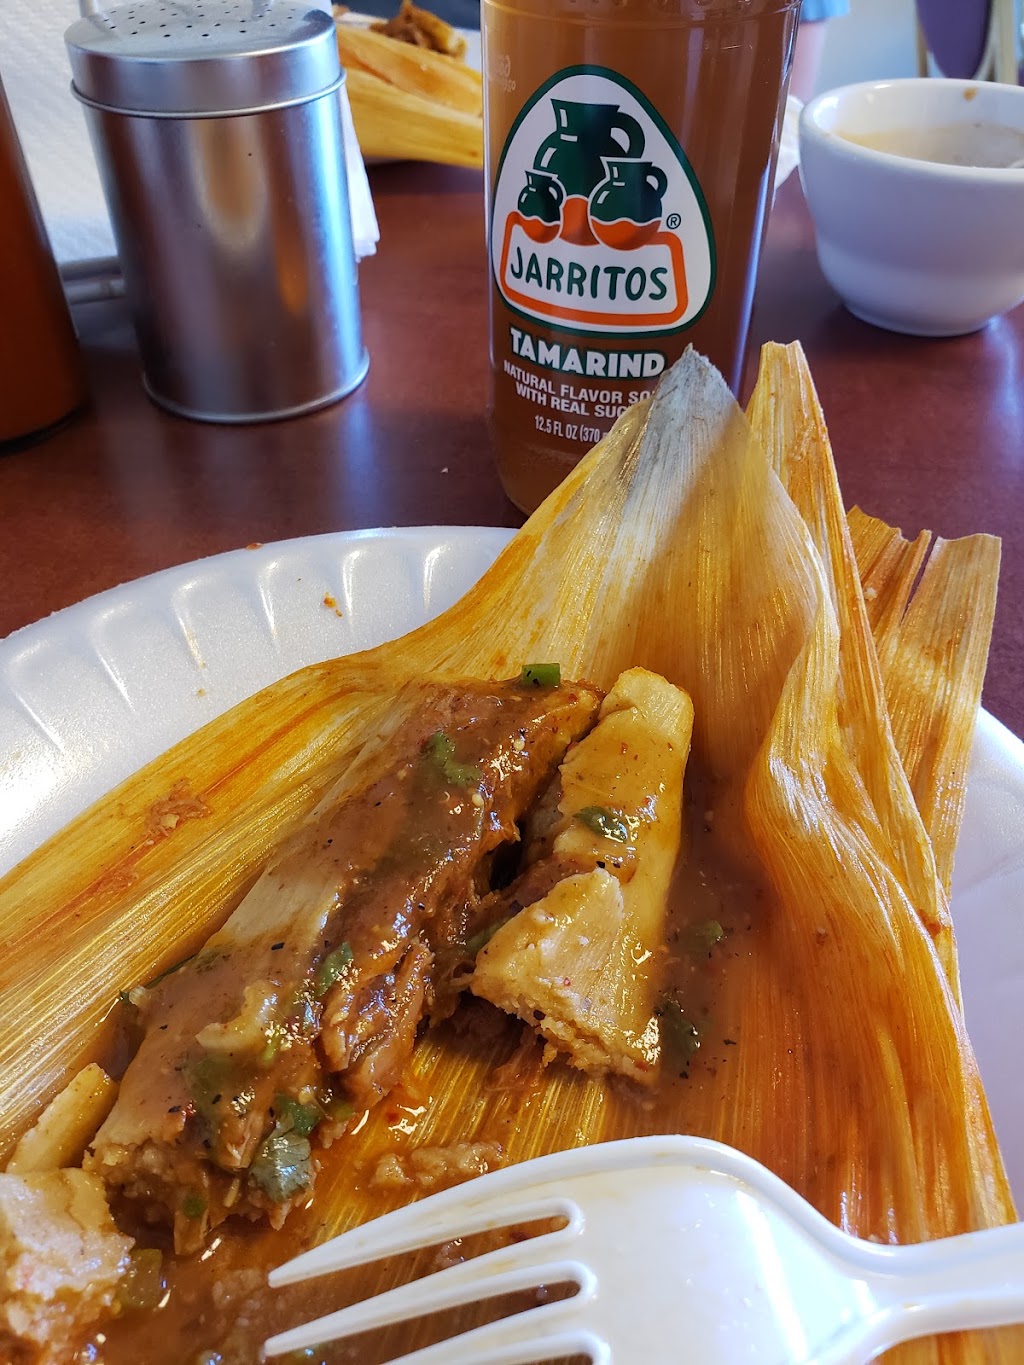 The Lady Tamales | 933 Woodside Dr, Carson City, NV 89701 | Phone: (775) 841-6533